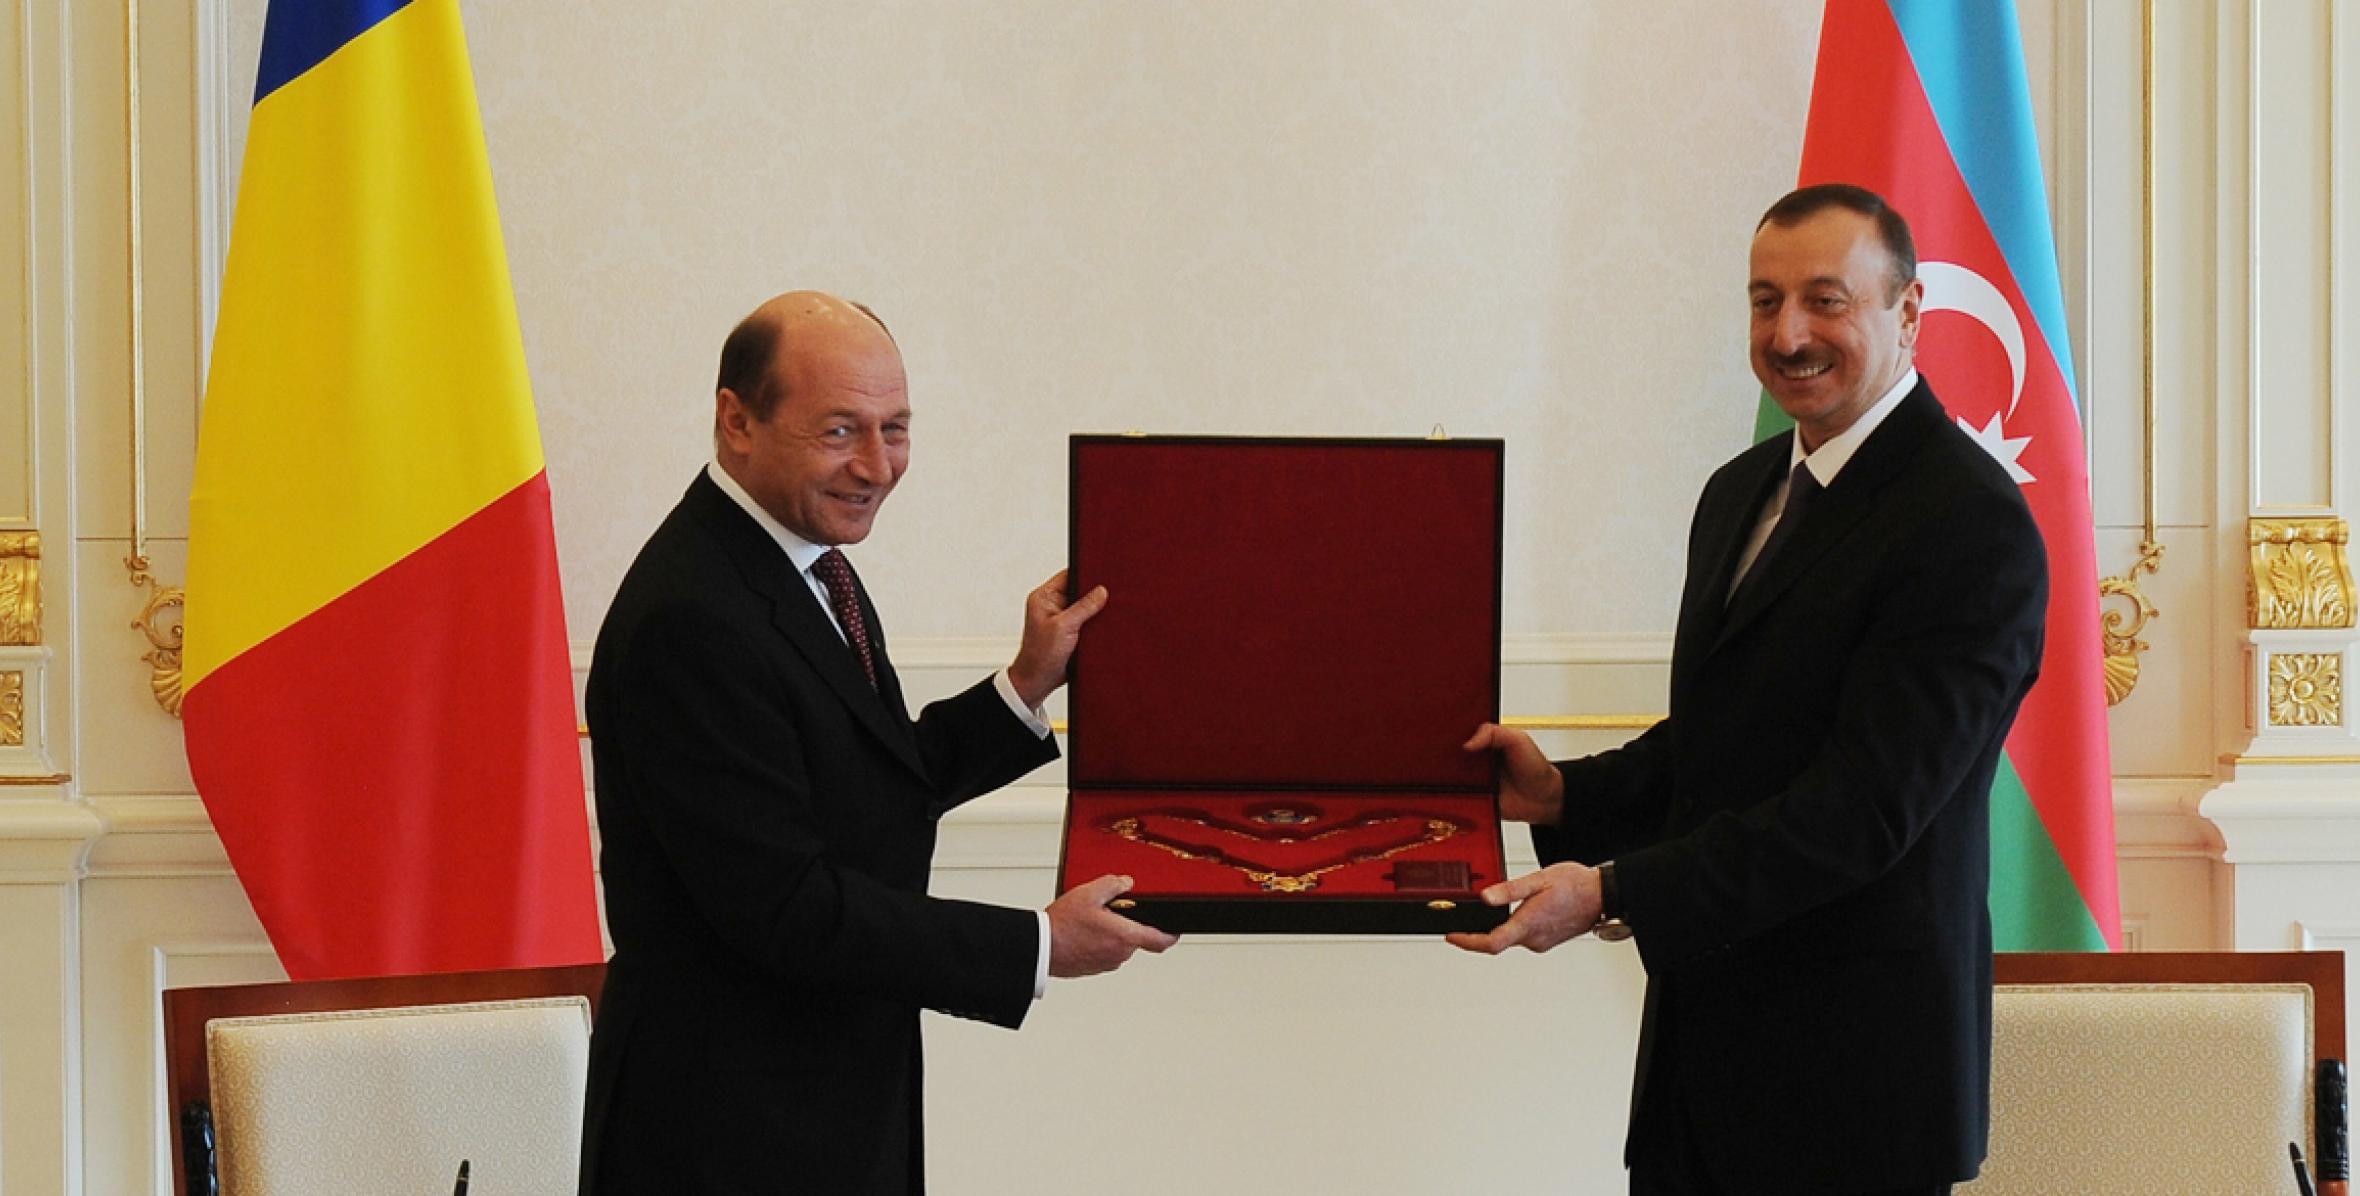 The ceremony of presenting decorations of highest orders took place between the Presidents of Azerbaijan and Romania